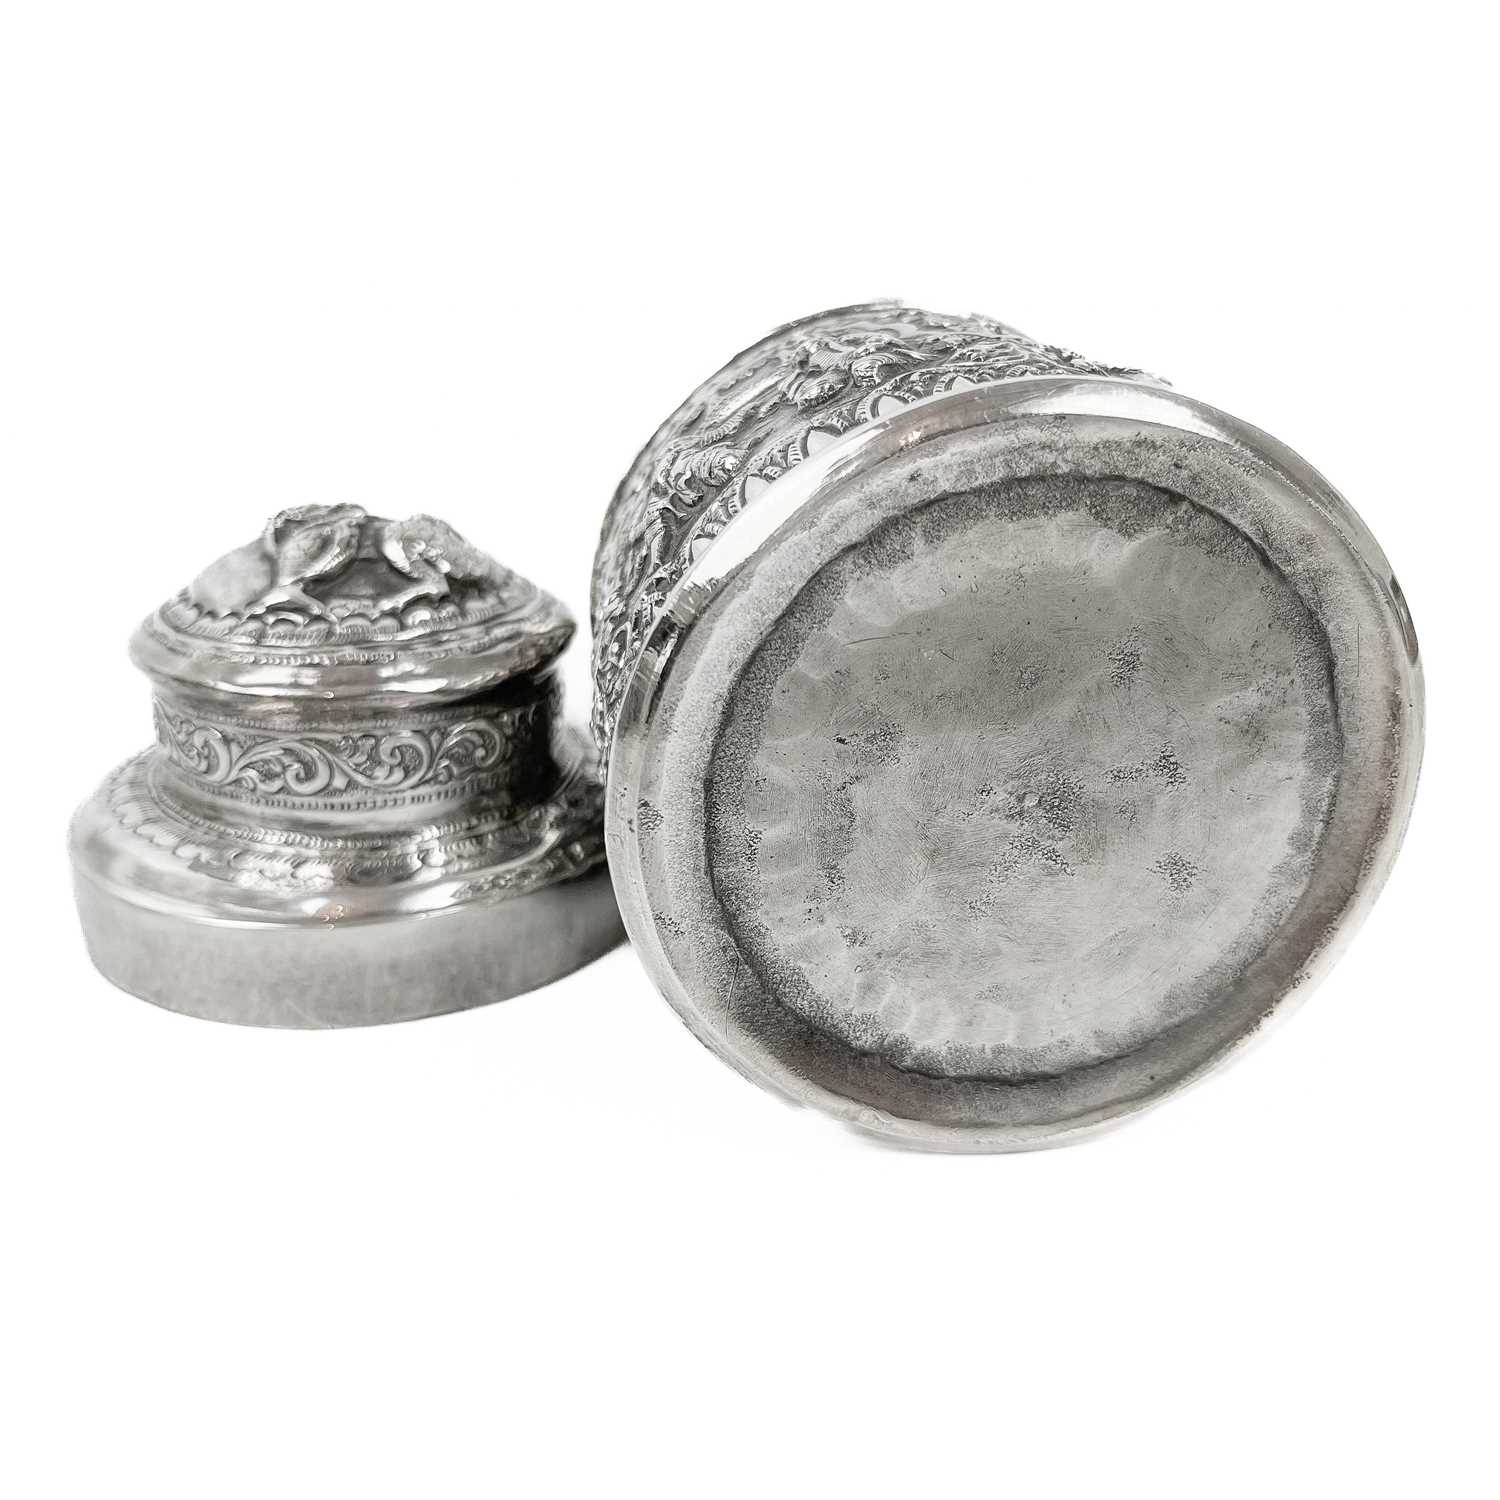 Two Burmese silver lidded cannisters, mid 20th century - Image 23 of 25